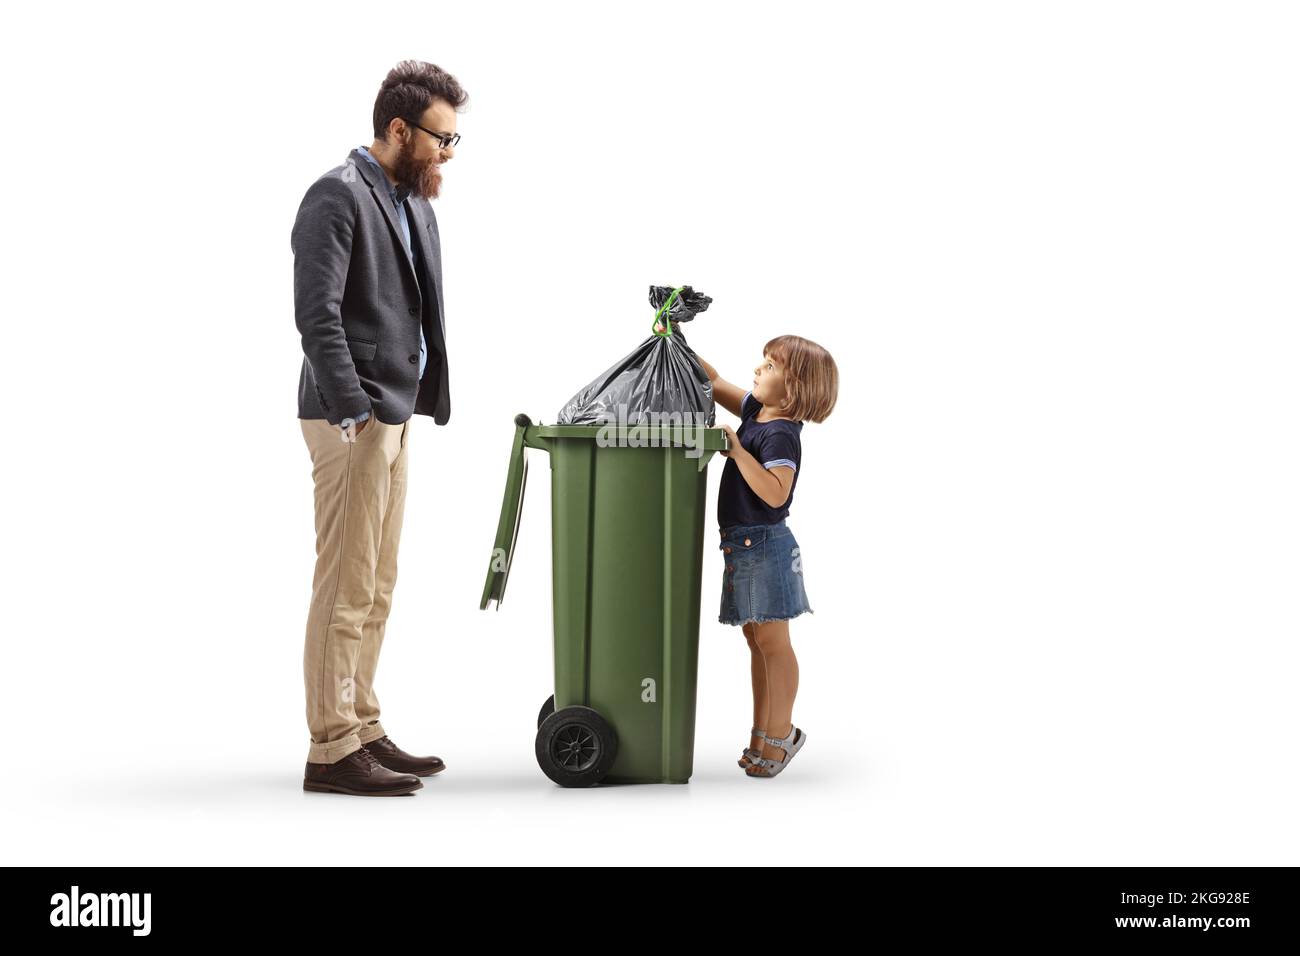 Man watching a little girl throwing a waste bag in a bin isolated on white background Stock Photo